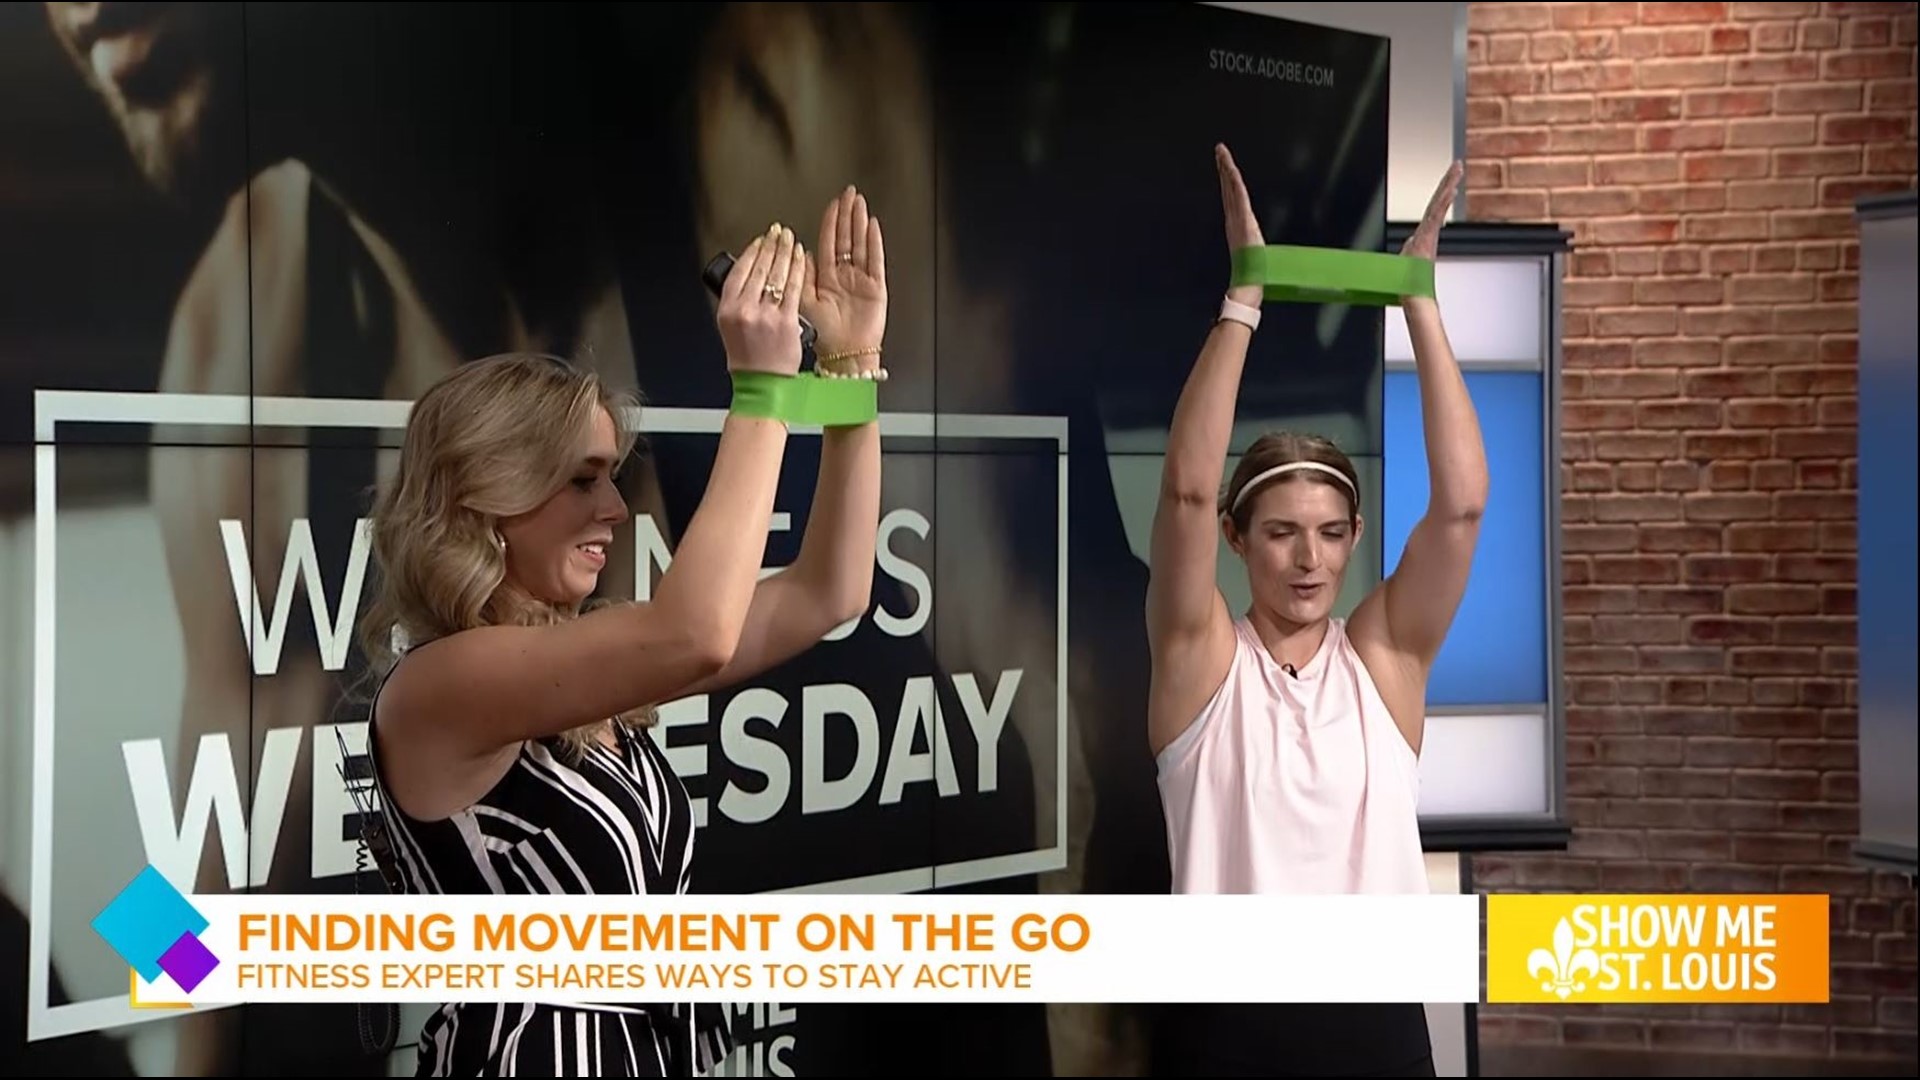 Stephanie explains how the bands can be used in the gym, at home, or on the go.